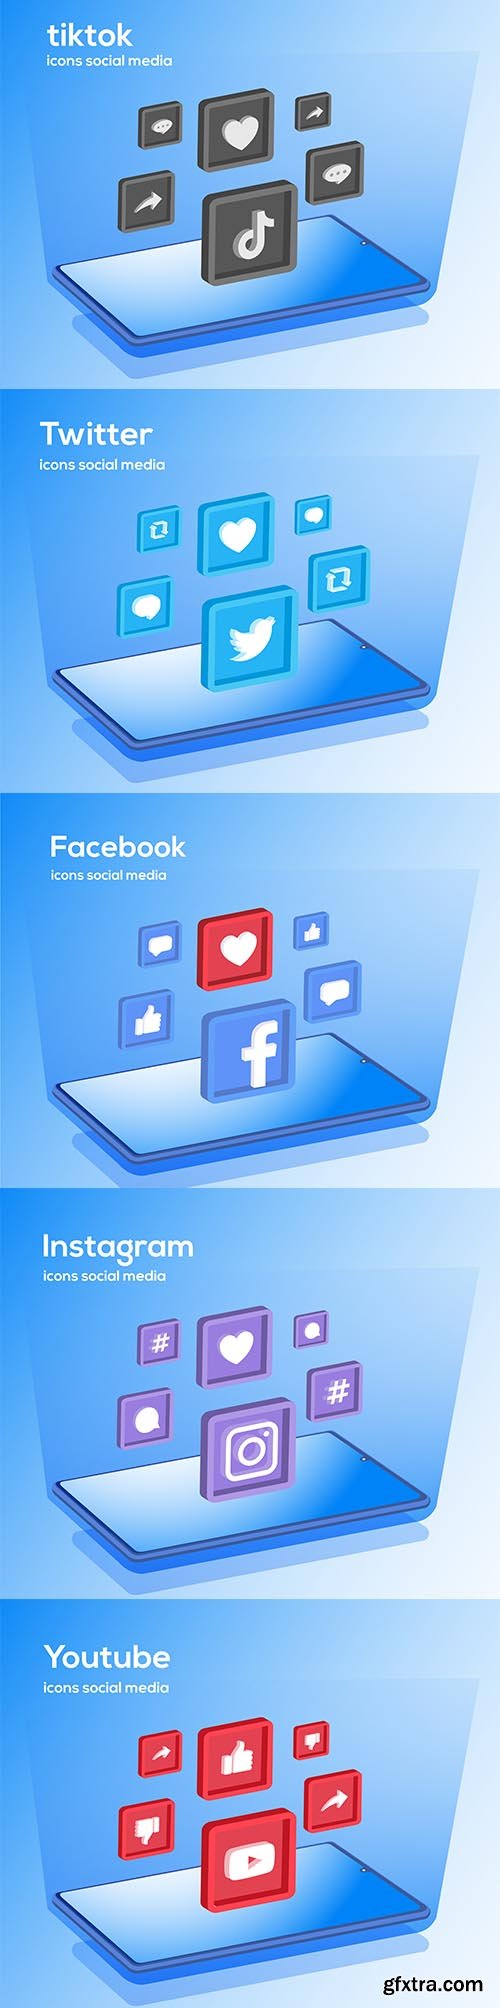 Social media icons with smartphone symbol